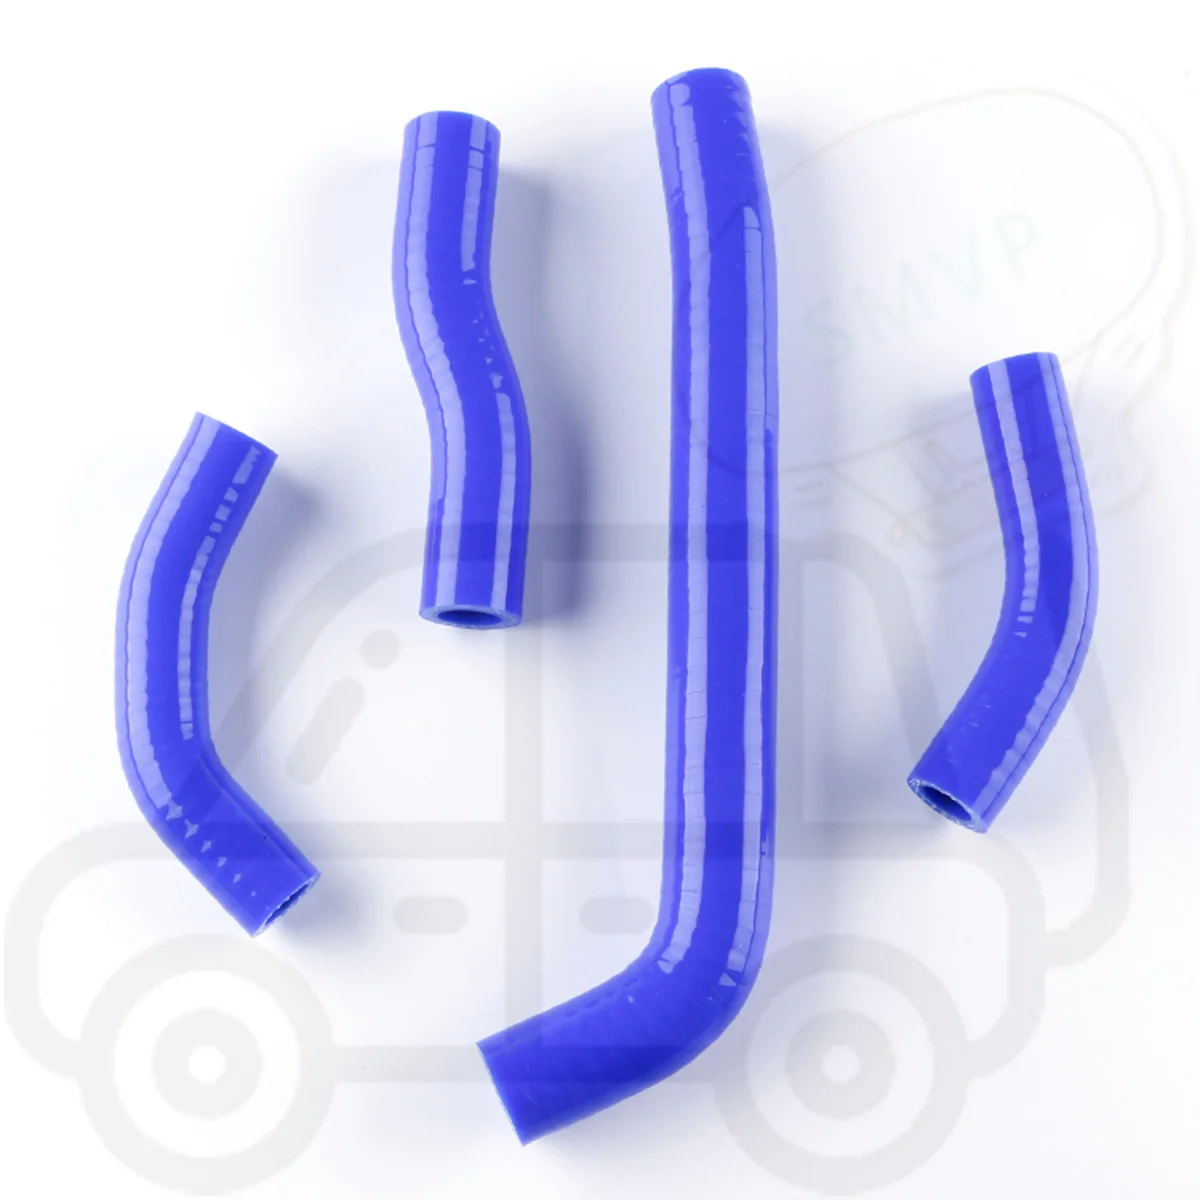 

For 2010-2013 2012 2011 Honda CRF250 CRF 250 R Silicone Radiator Coolant Hose 4PCS Replacement Parts Upper and Lower 10 Colors